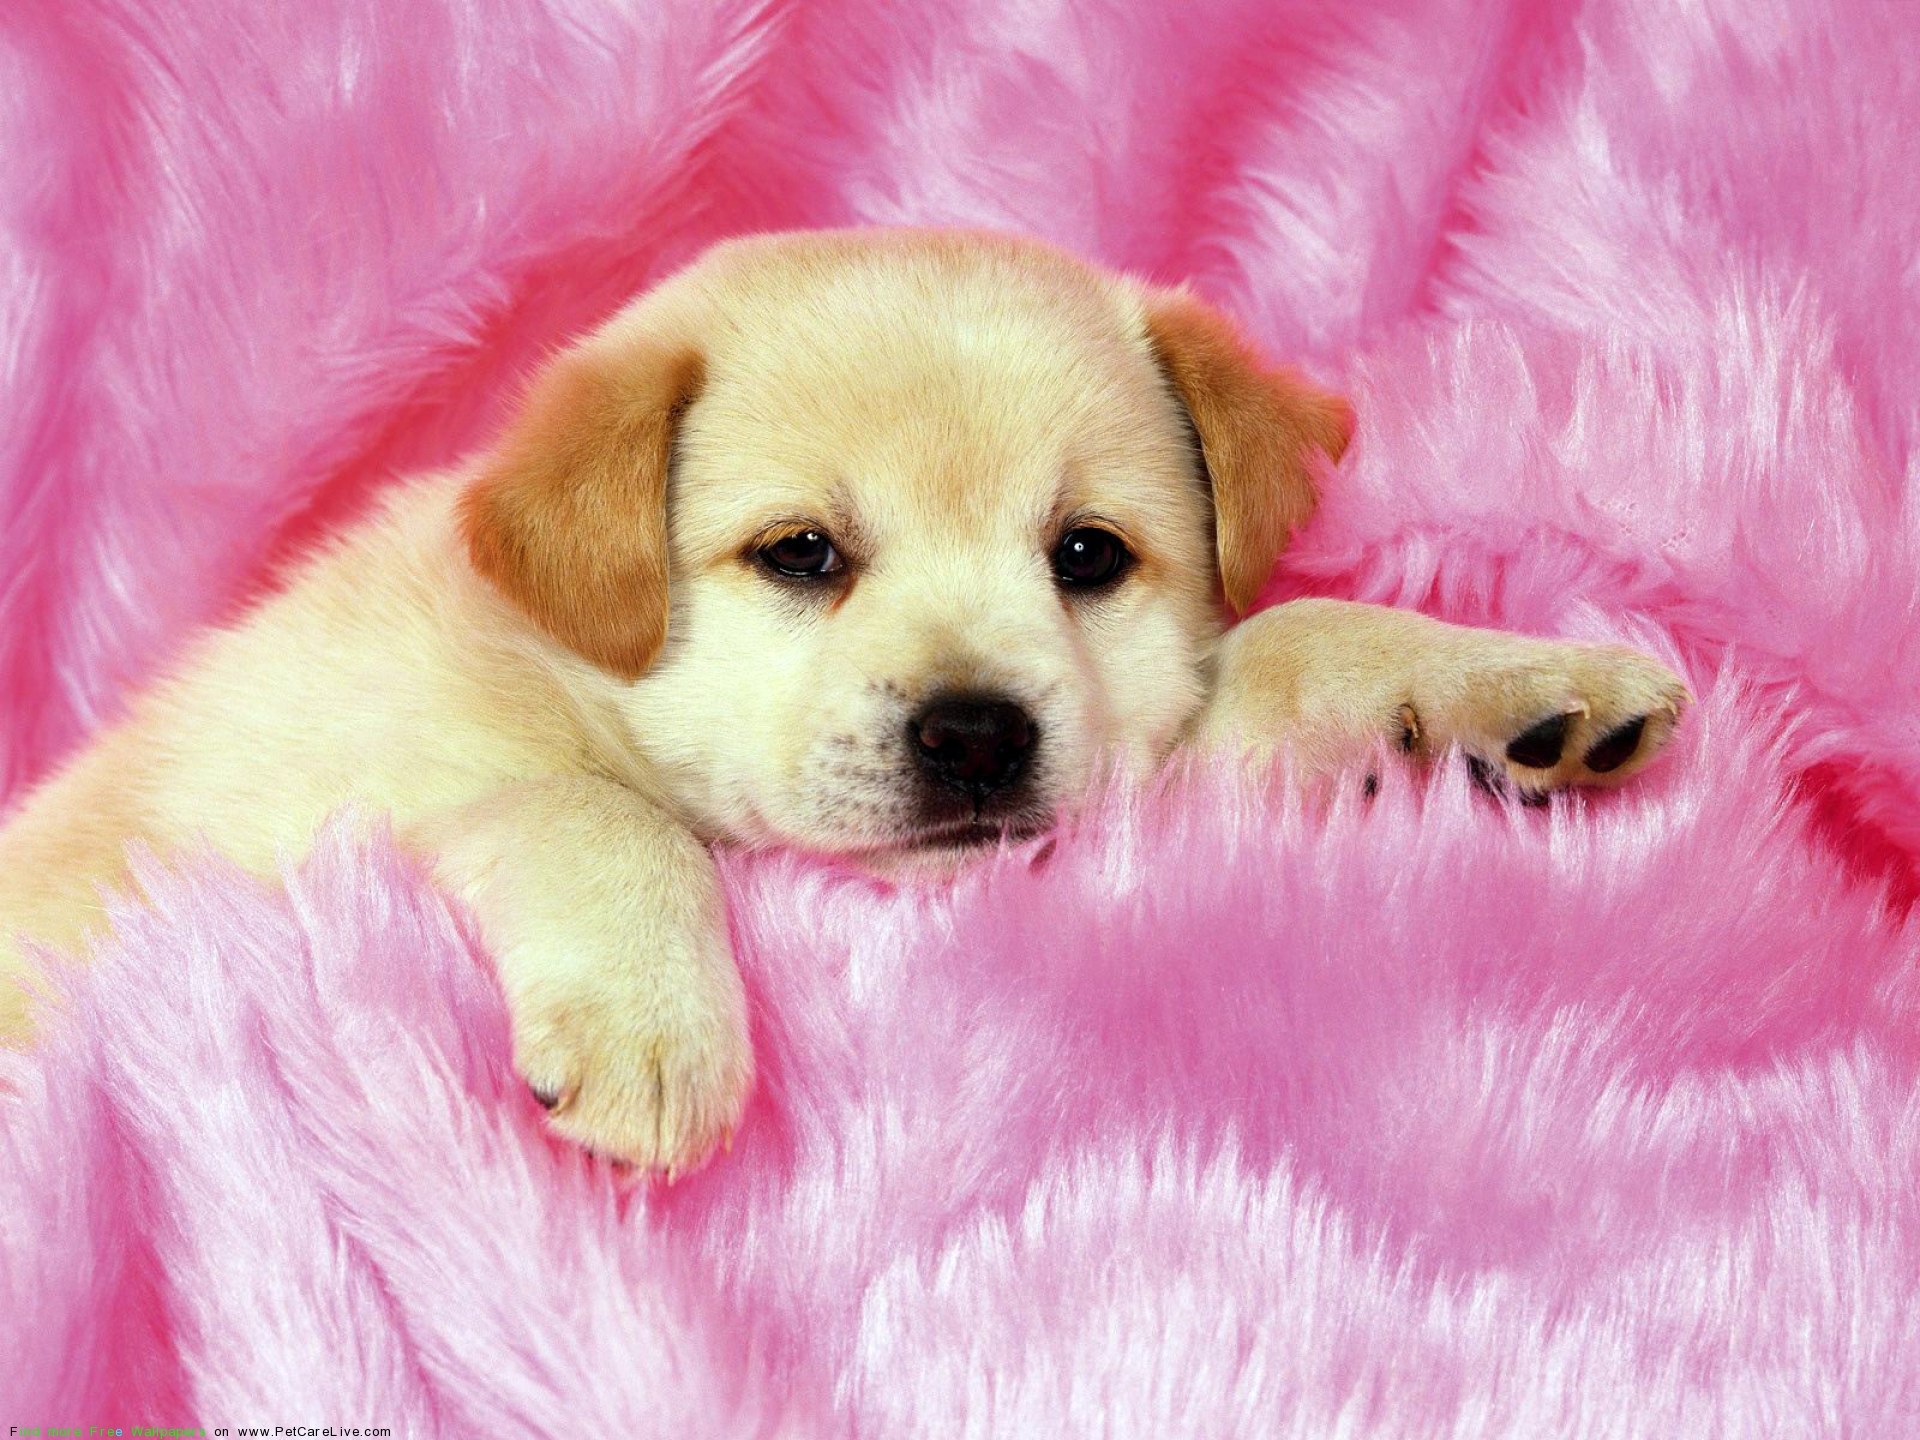 The Little Cute Dog S Puppies Desktop Wallpaper Pictures For Pc